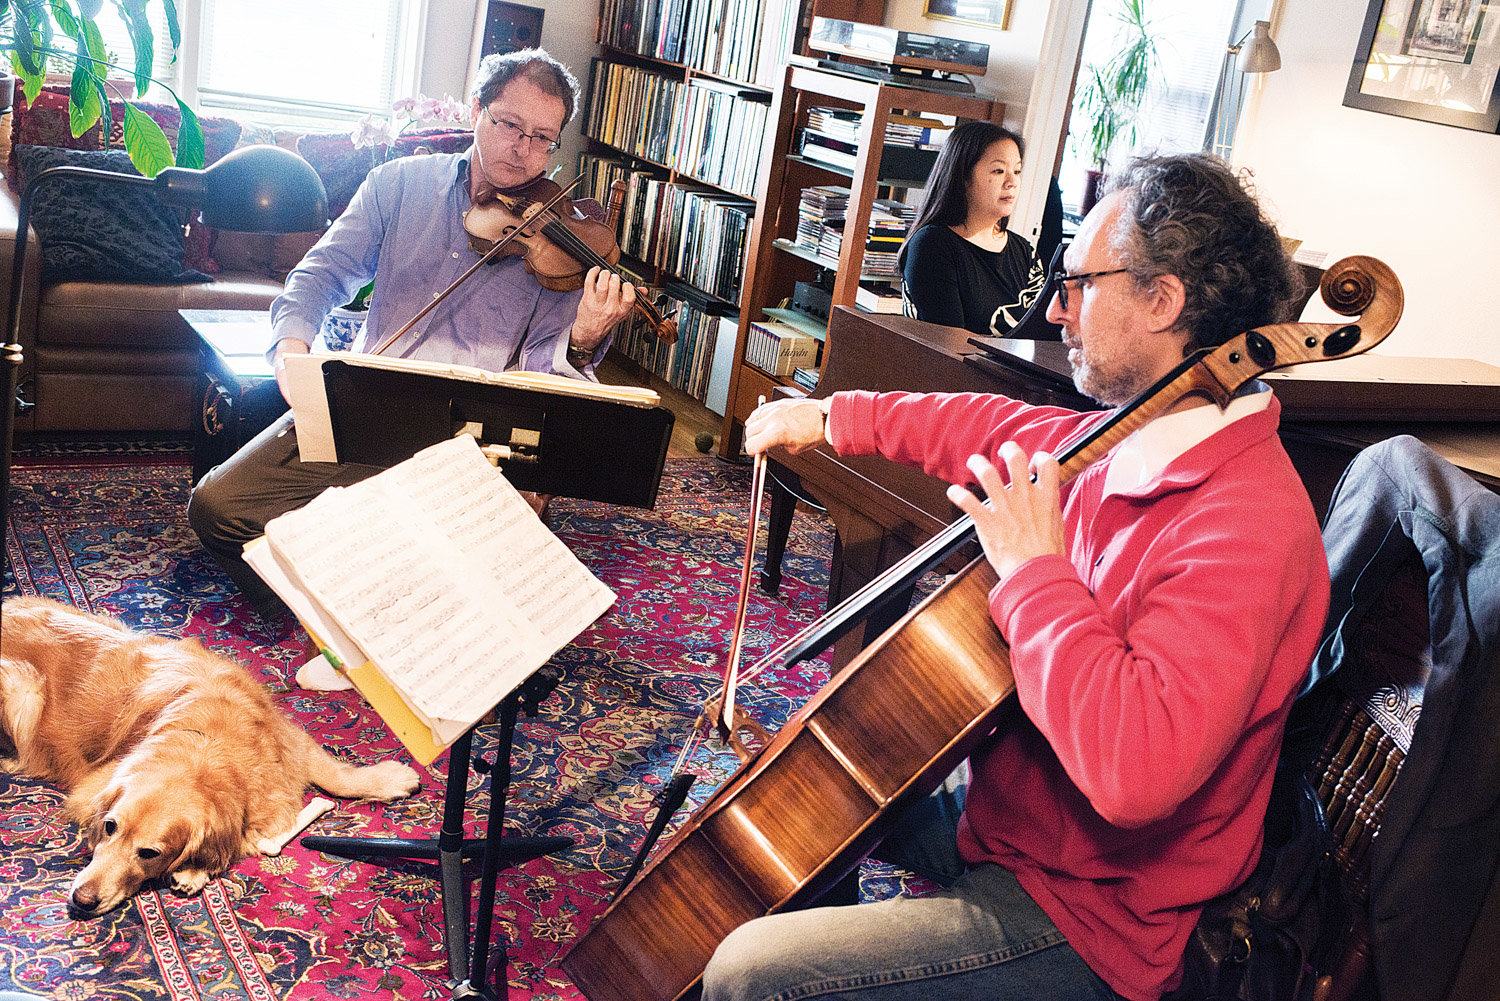 The di.vi.sion trio — Kurt Briggs on the violin, Renee Cometa-Briggs playing piano, and Matt Goeke on the cello — rehearse in an apartment in 2015. The group will perform at the Riverdale-Yonkers Society for Ethical Culture on Dec. 1.